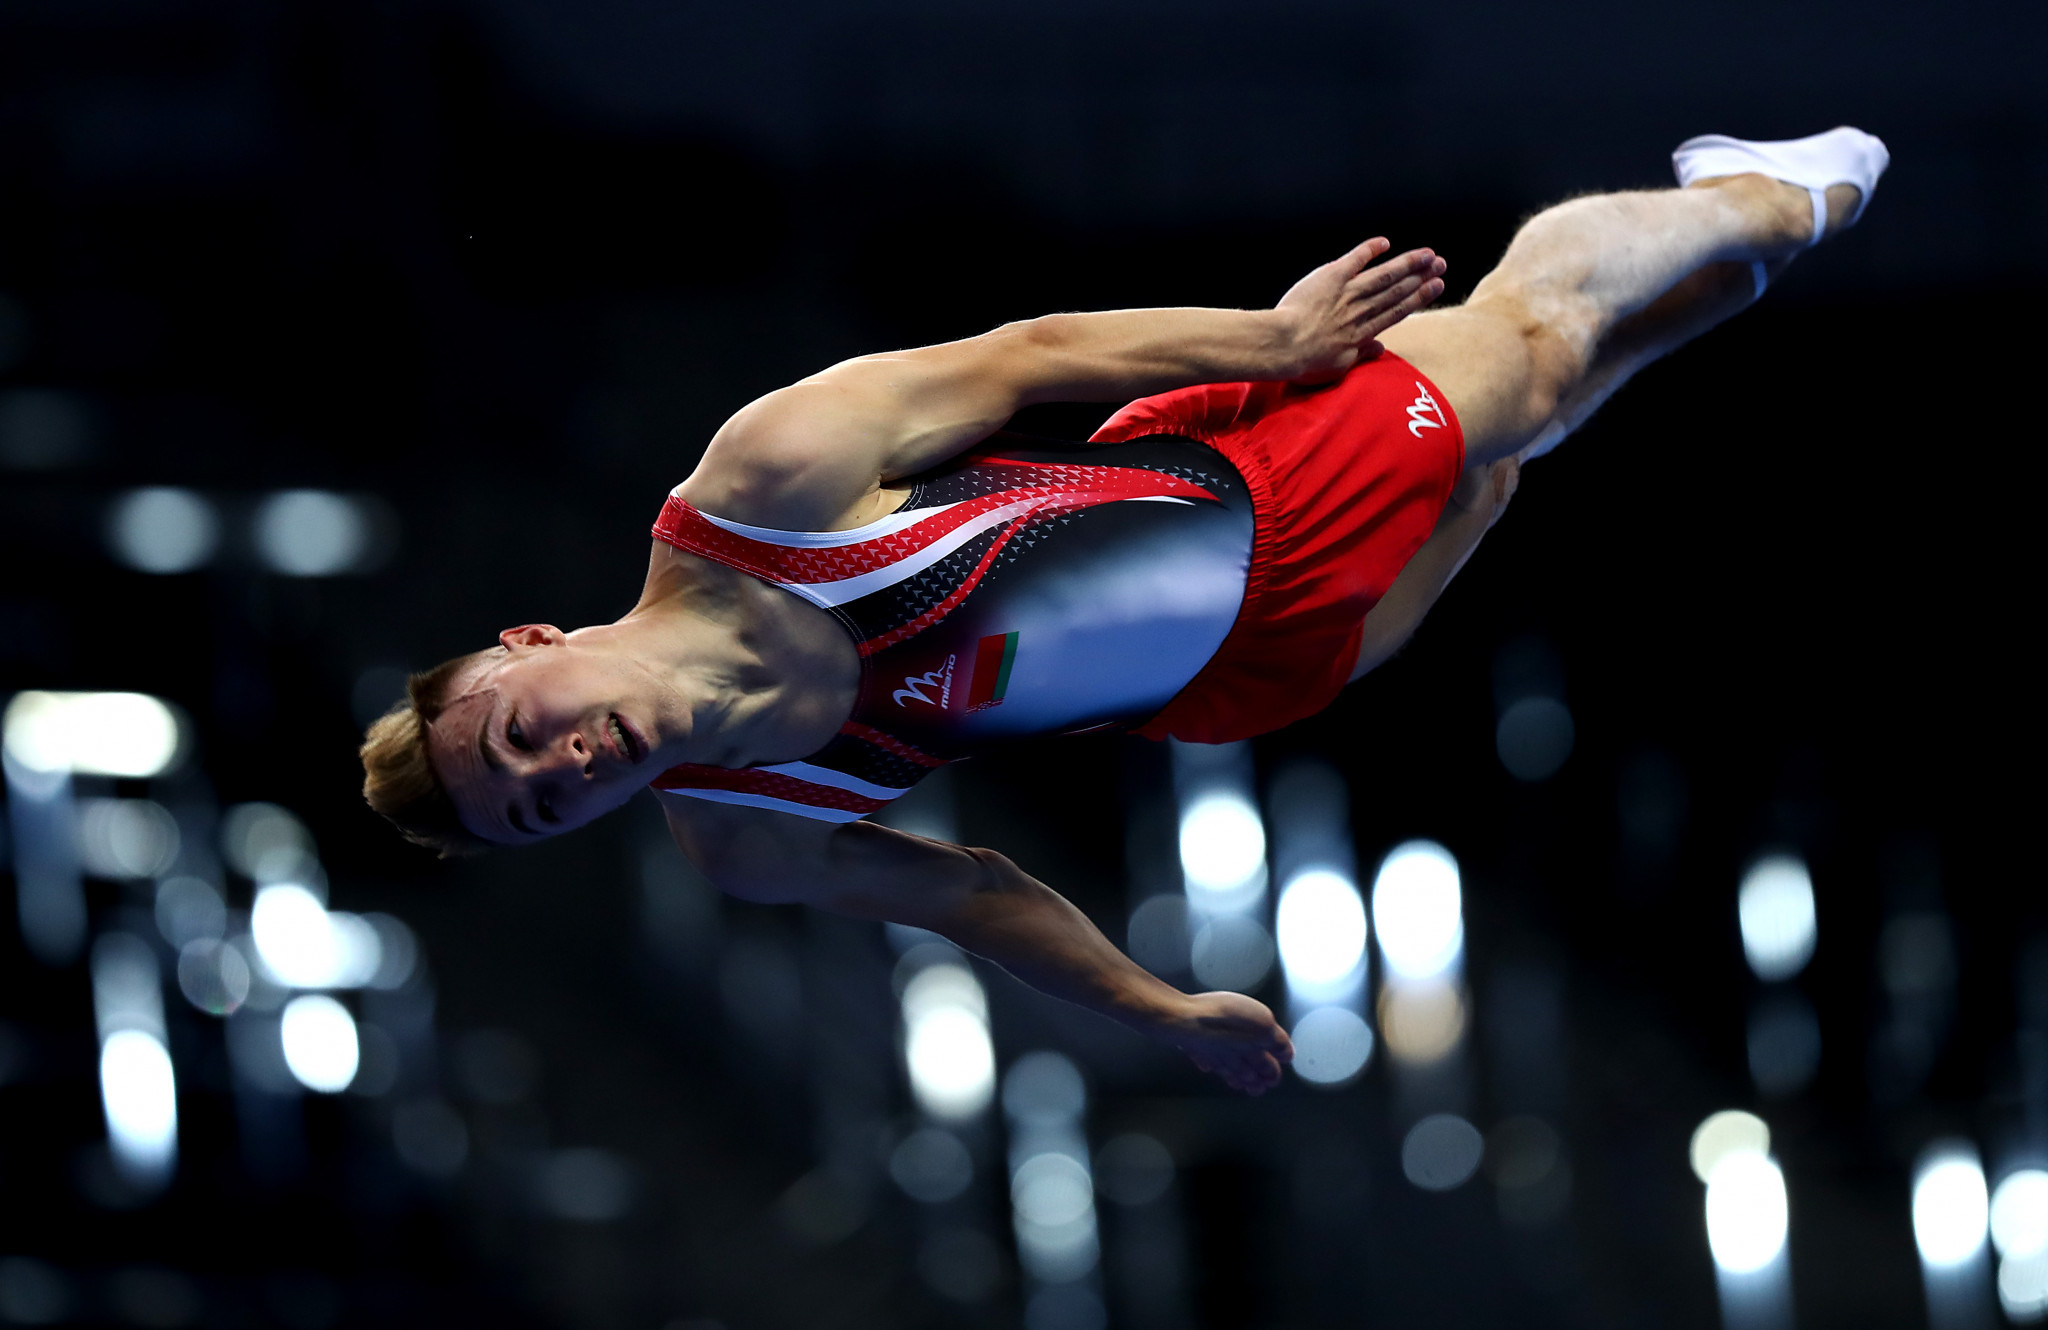 Rio 2016 Olympic champion Uladzislau Hancharou earned trampoline gold at Minsk 2019 ©Getty Images